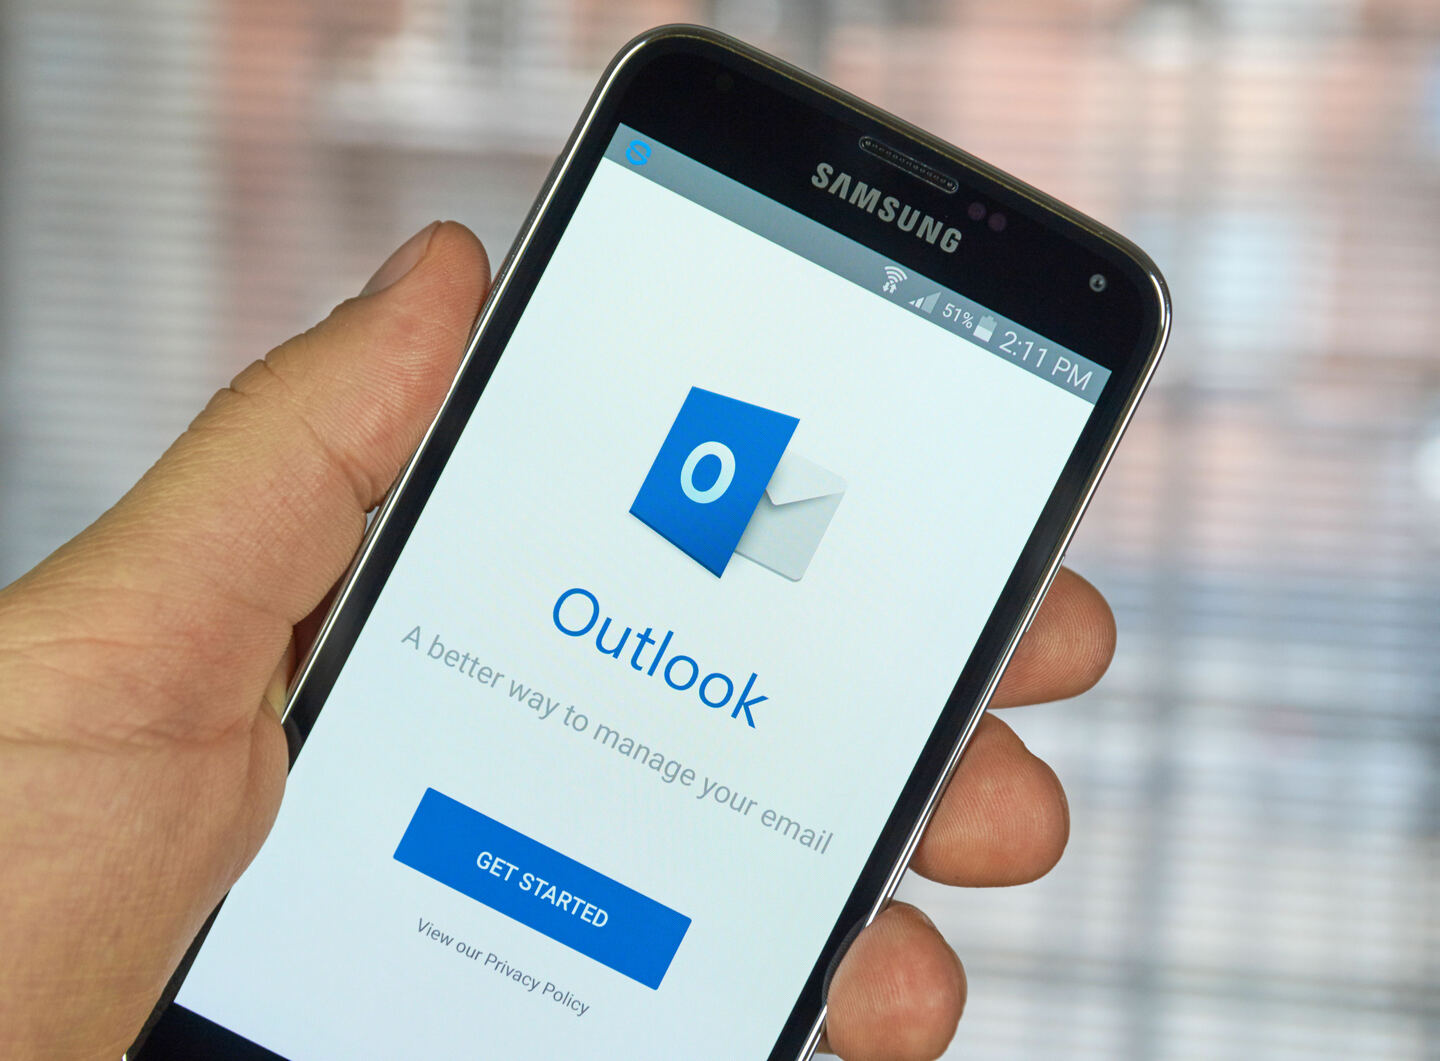 Outlook running on a Samsung phone